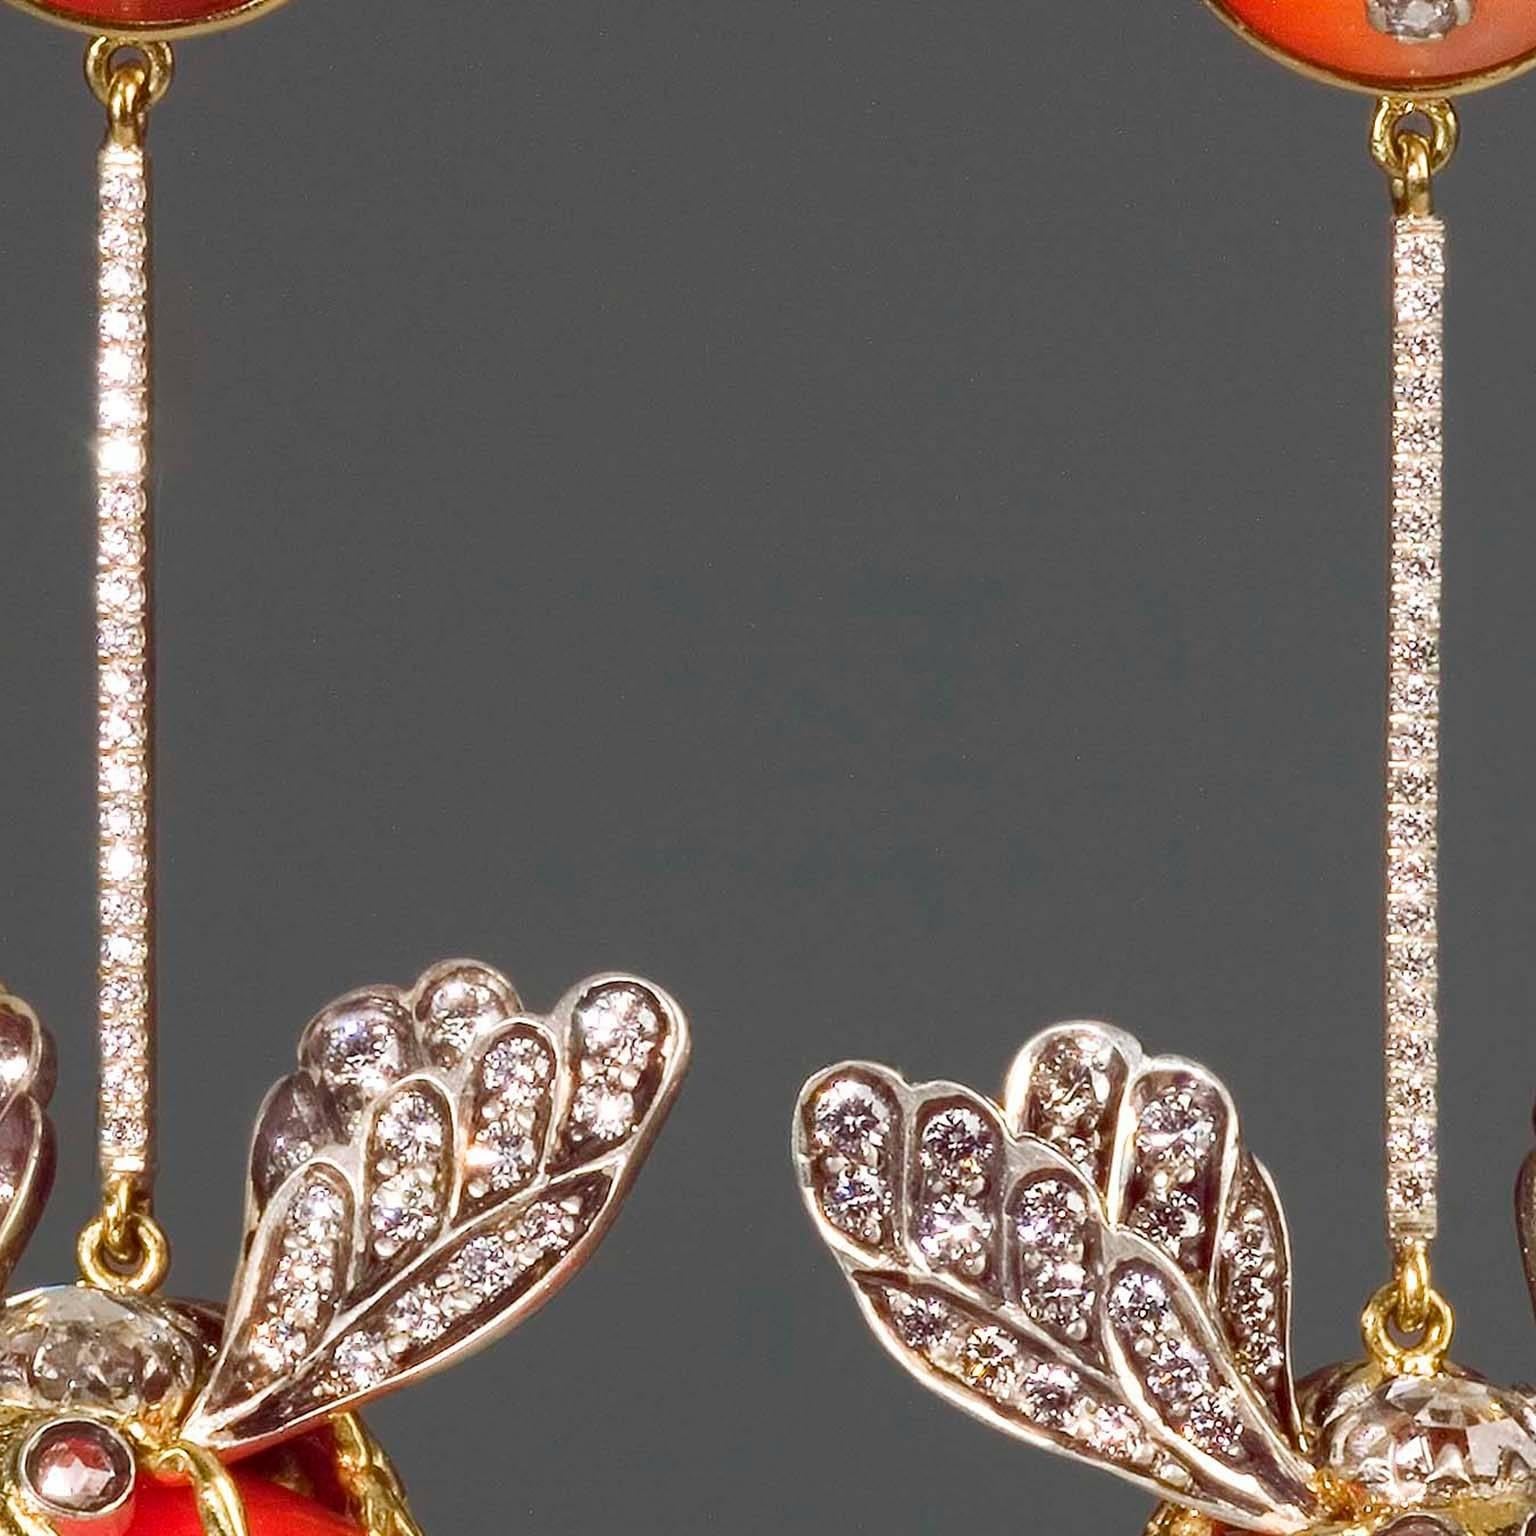 Ark Design, Diamonds, Coral 18 Karat Yellow Gold, Silver, Drop Earrings In New Condition For Sale In New York, NY